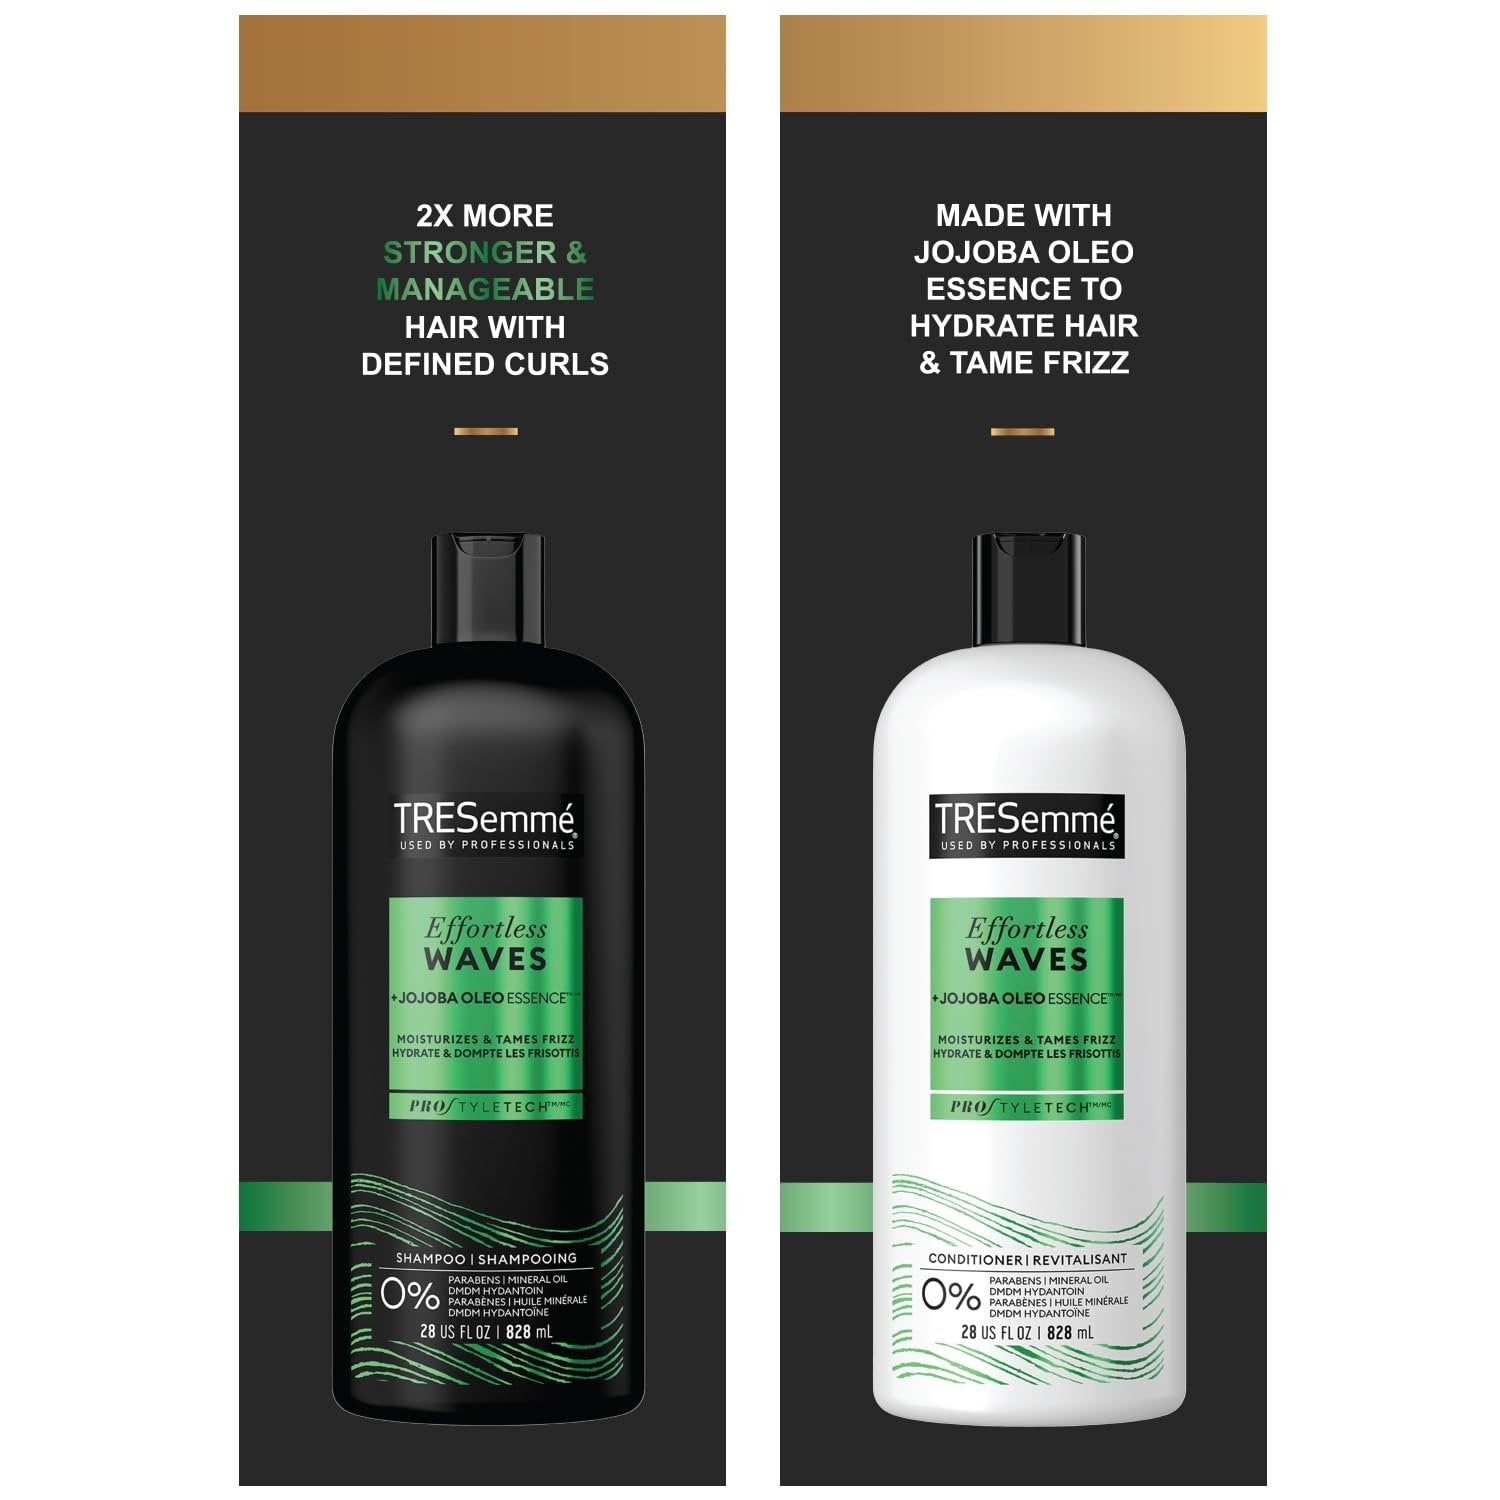 TRESemmé Shampoo and Conditioner Set - Effortless Waves, Curly Hair Products for Women/Men, Jojoba Oil for Hair, Anti Frizz Hair Products, 28 Fl Oz (2 Piece Set)